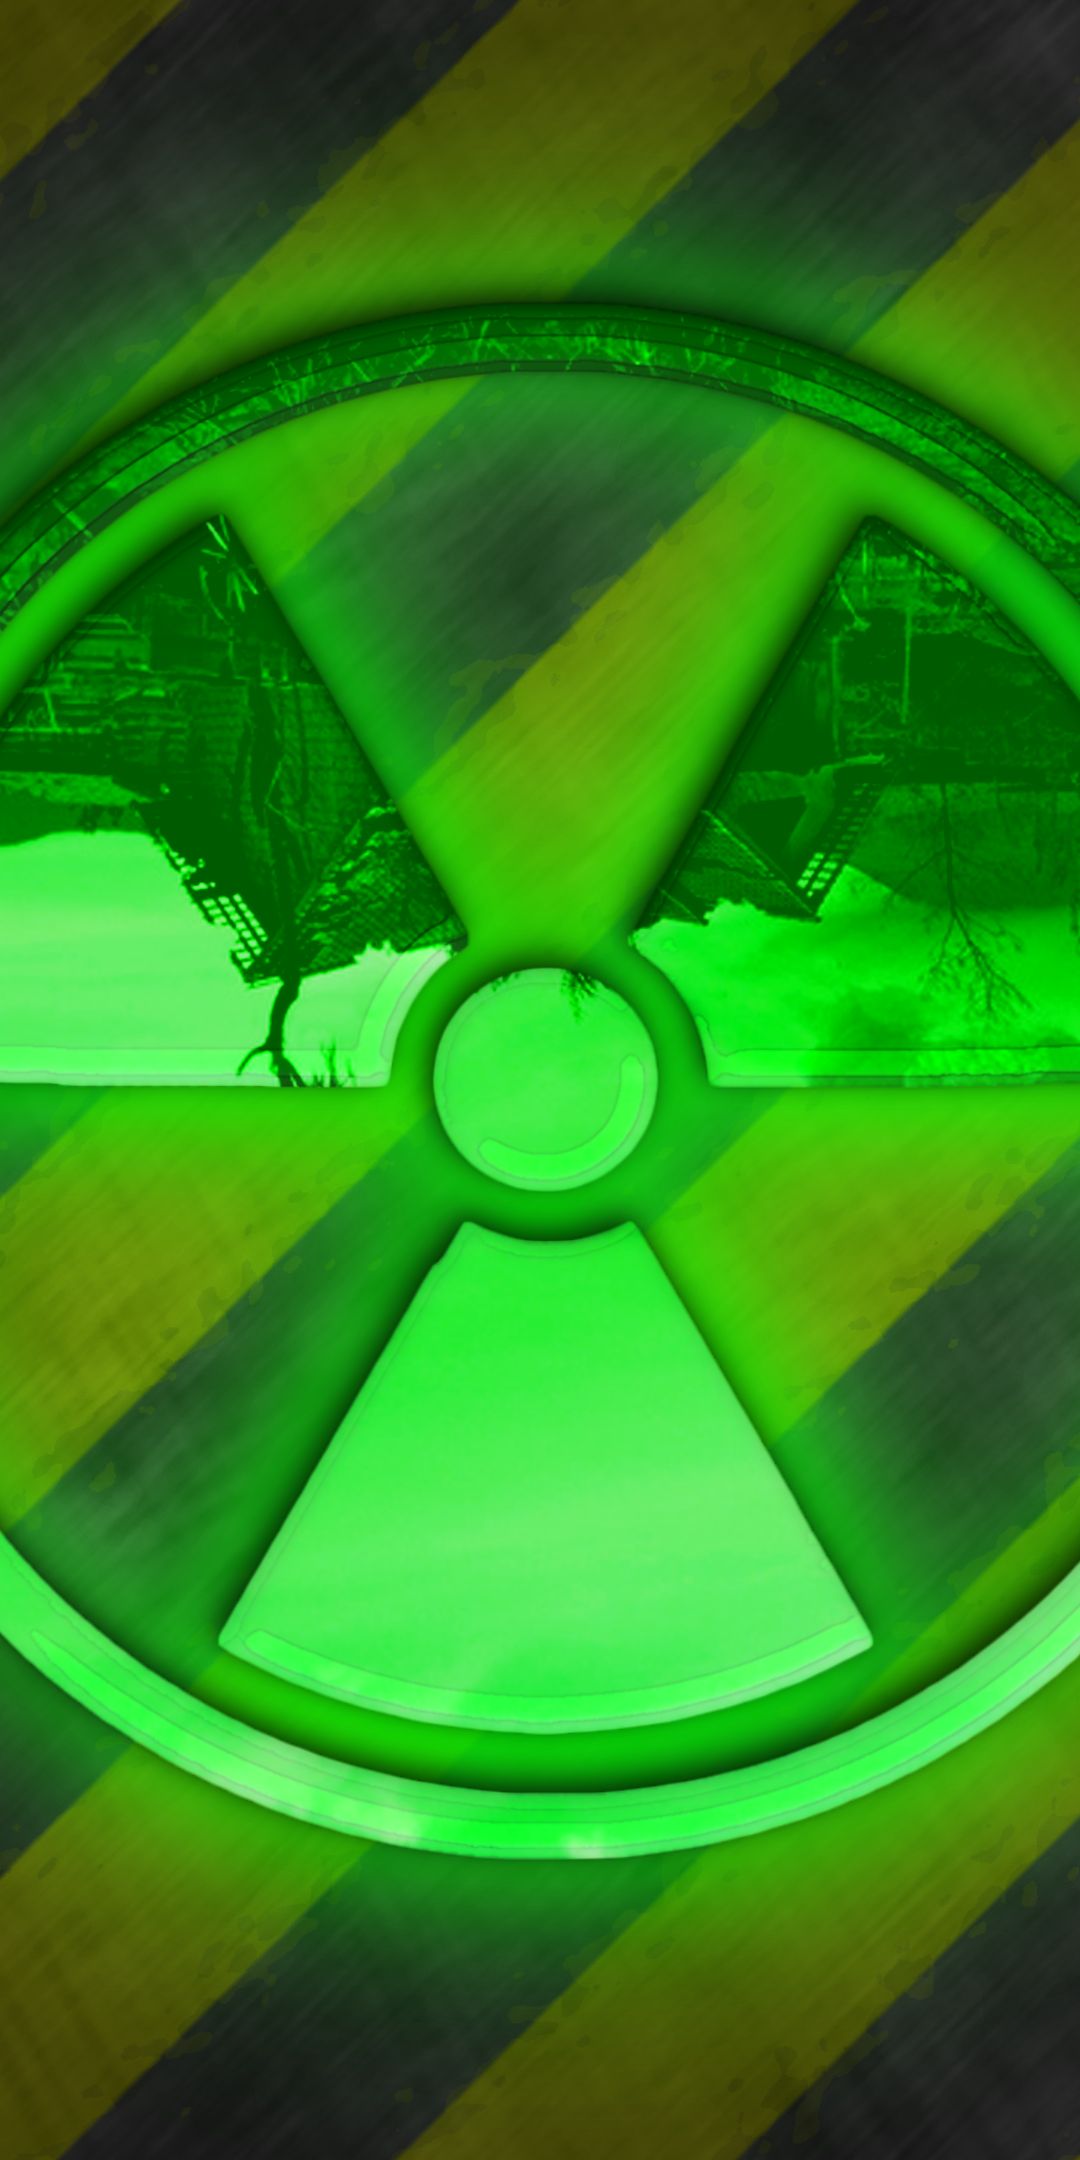 sci fi, radioactive, danger, nuclear High Definition image